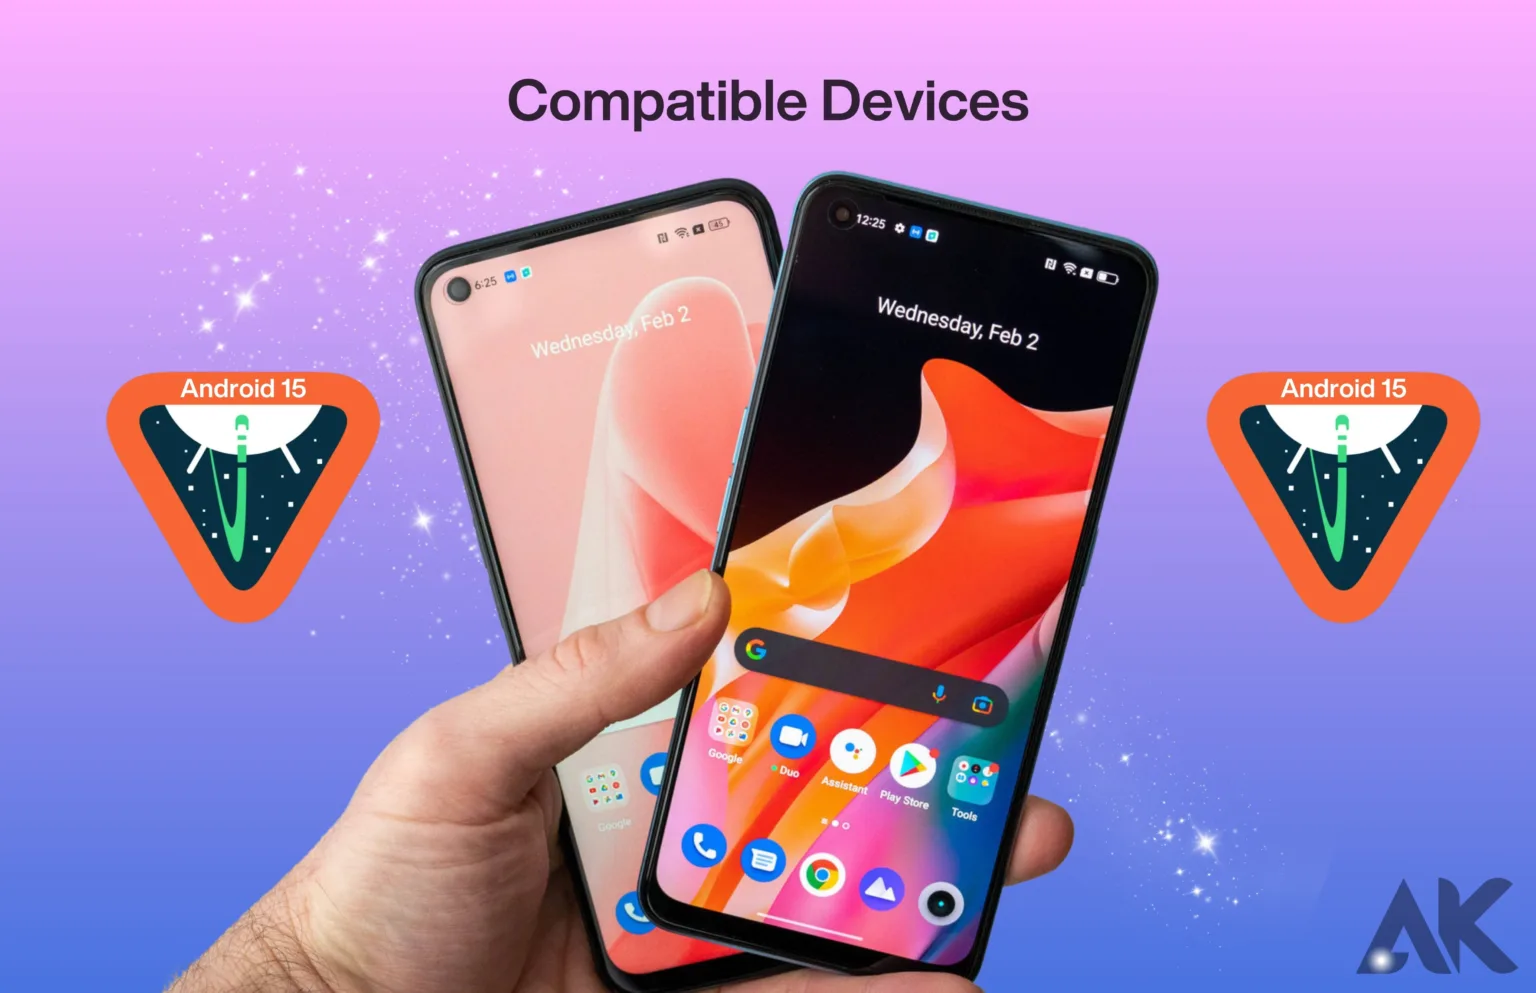 android 15 compatible devices